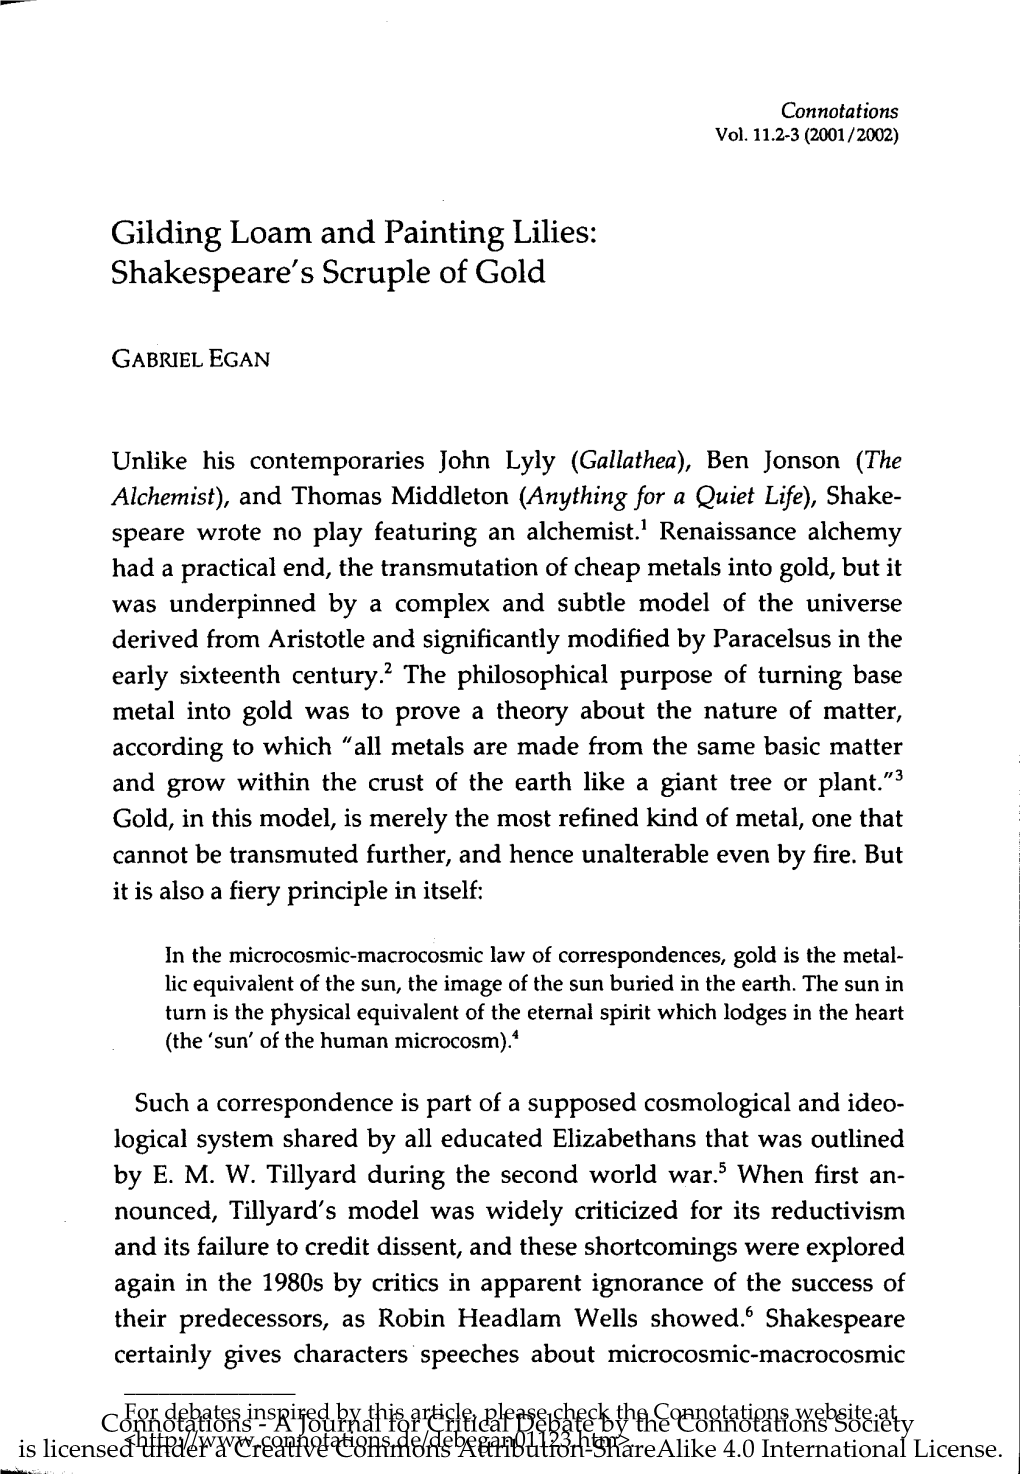 Gilding Loam and Painting Lilies: Shakespeare's Scruple of Gold